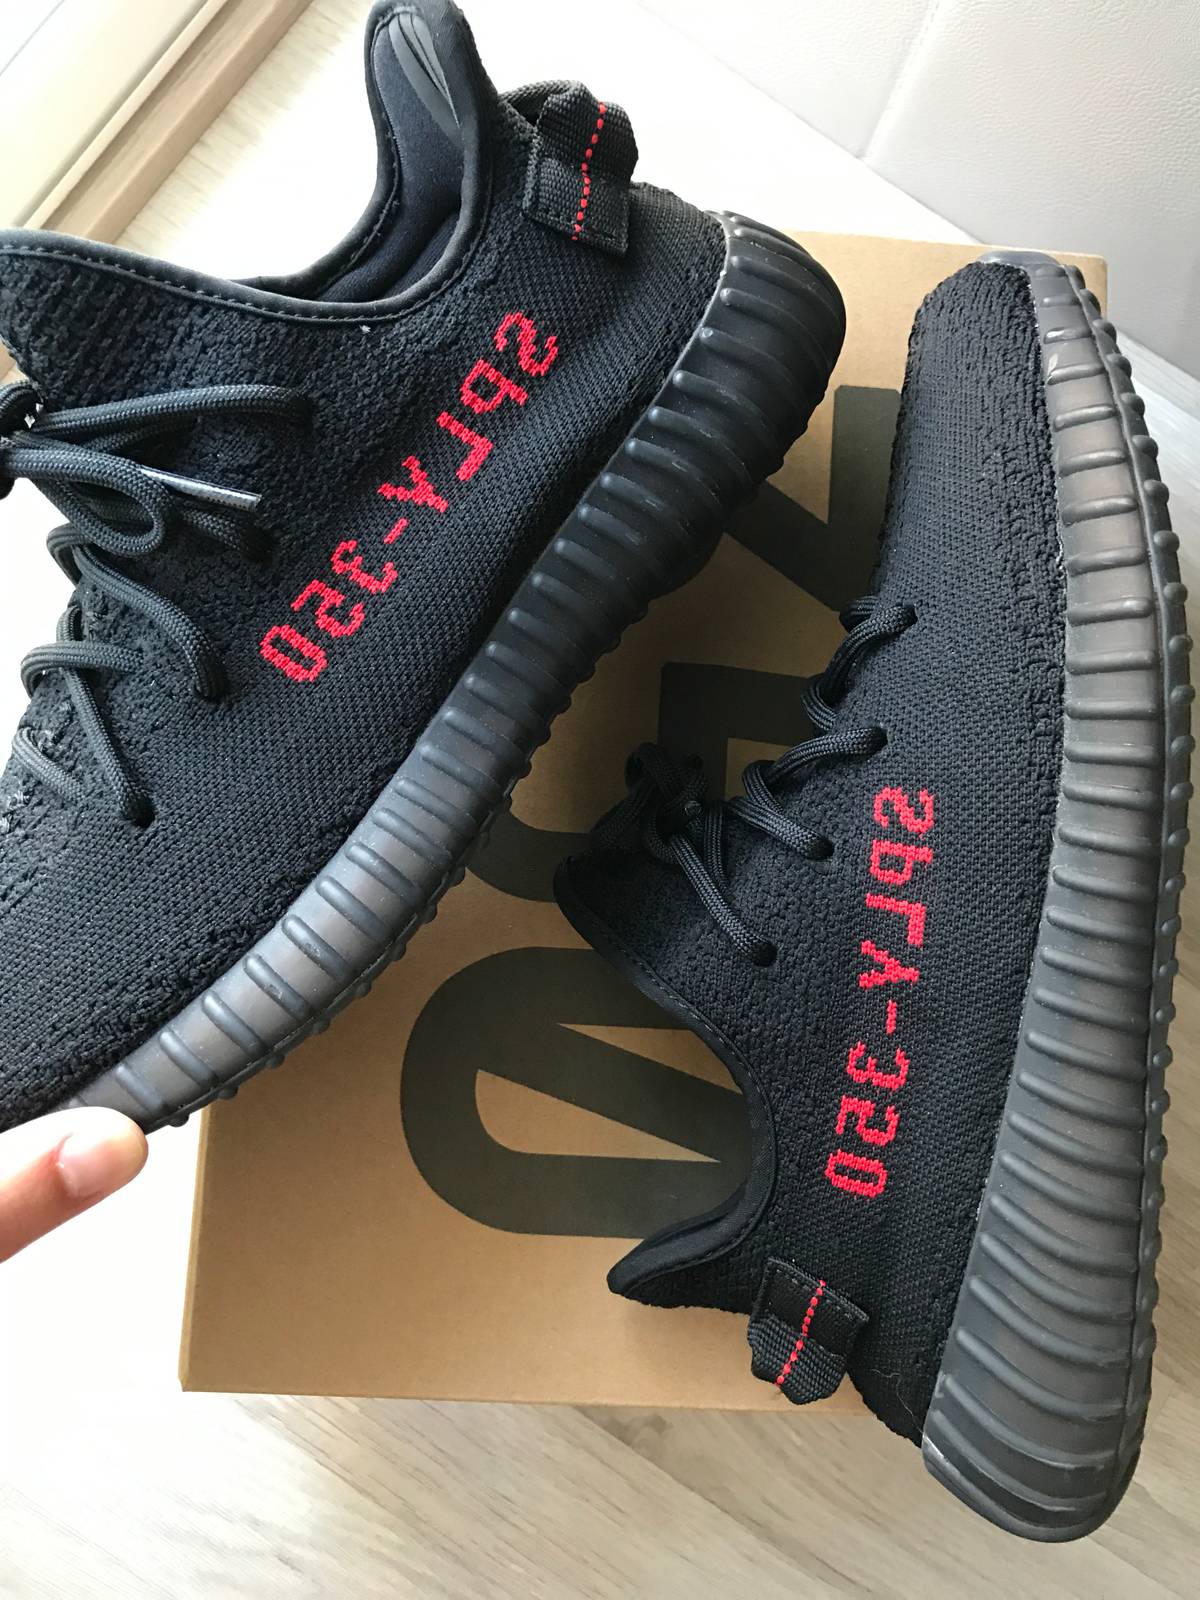 Adidas Yeezy Boost 350 v2 Core Black Red Bred BY9612